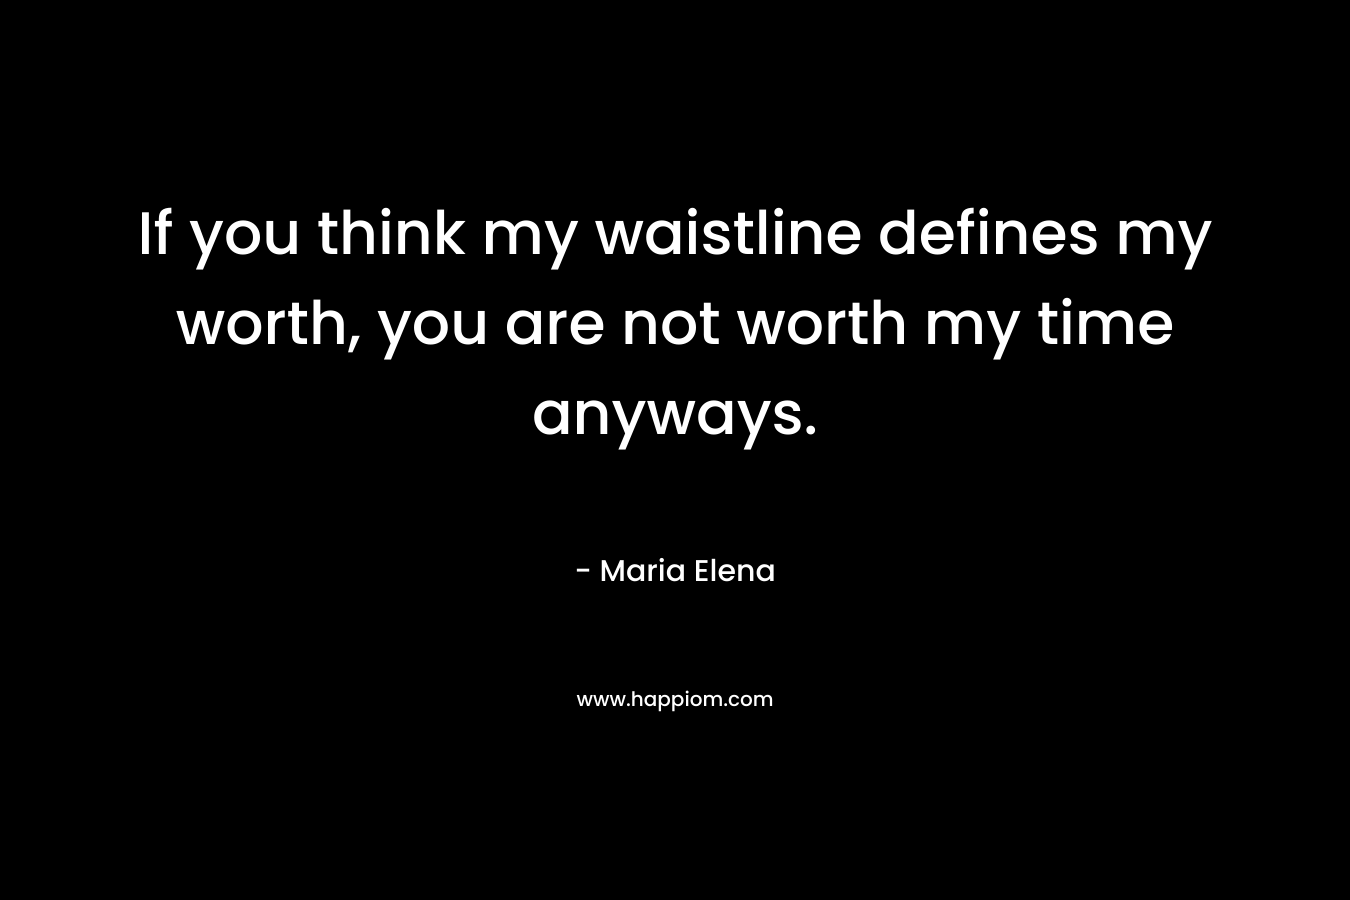 If you think my waistline defines my worth, you are not worth my time anyways.